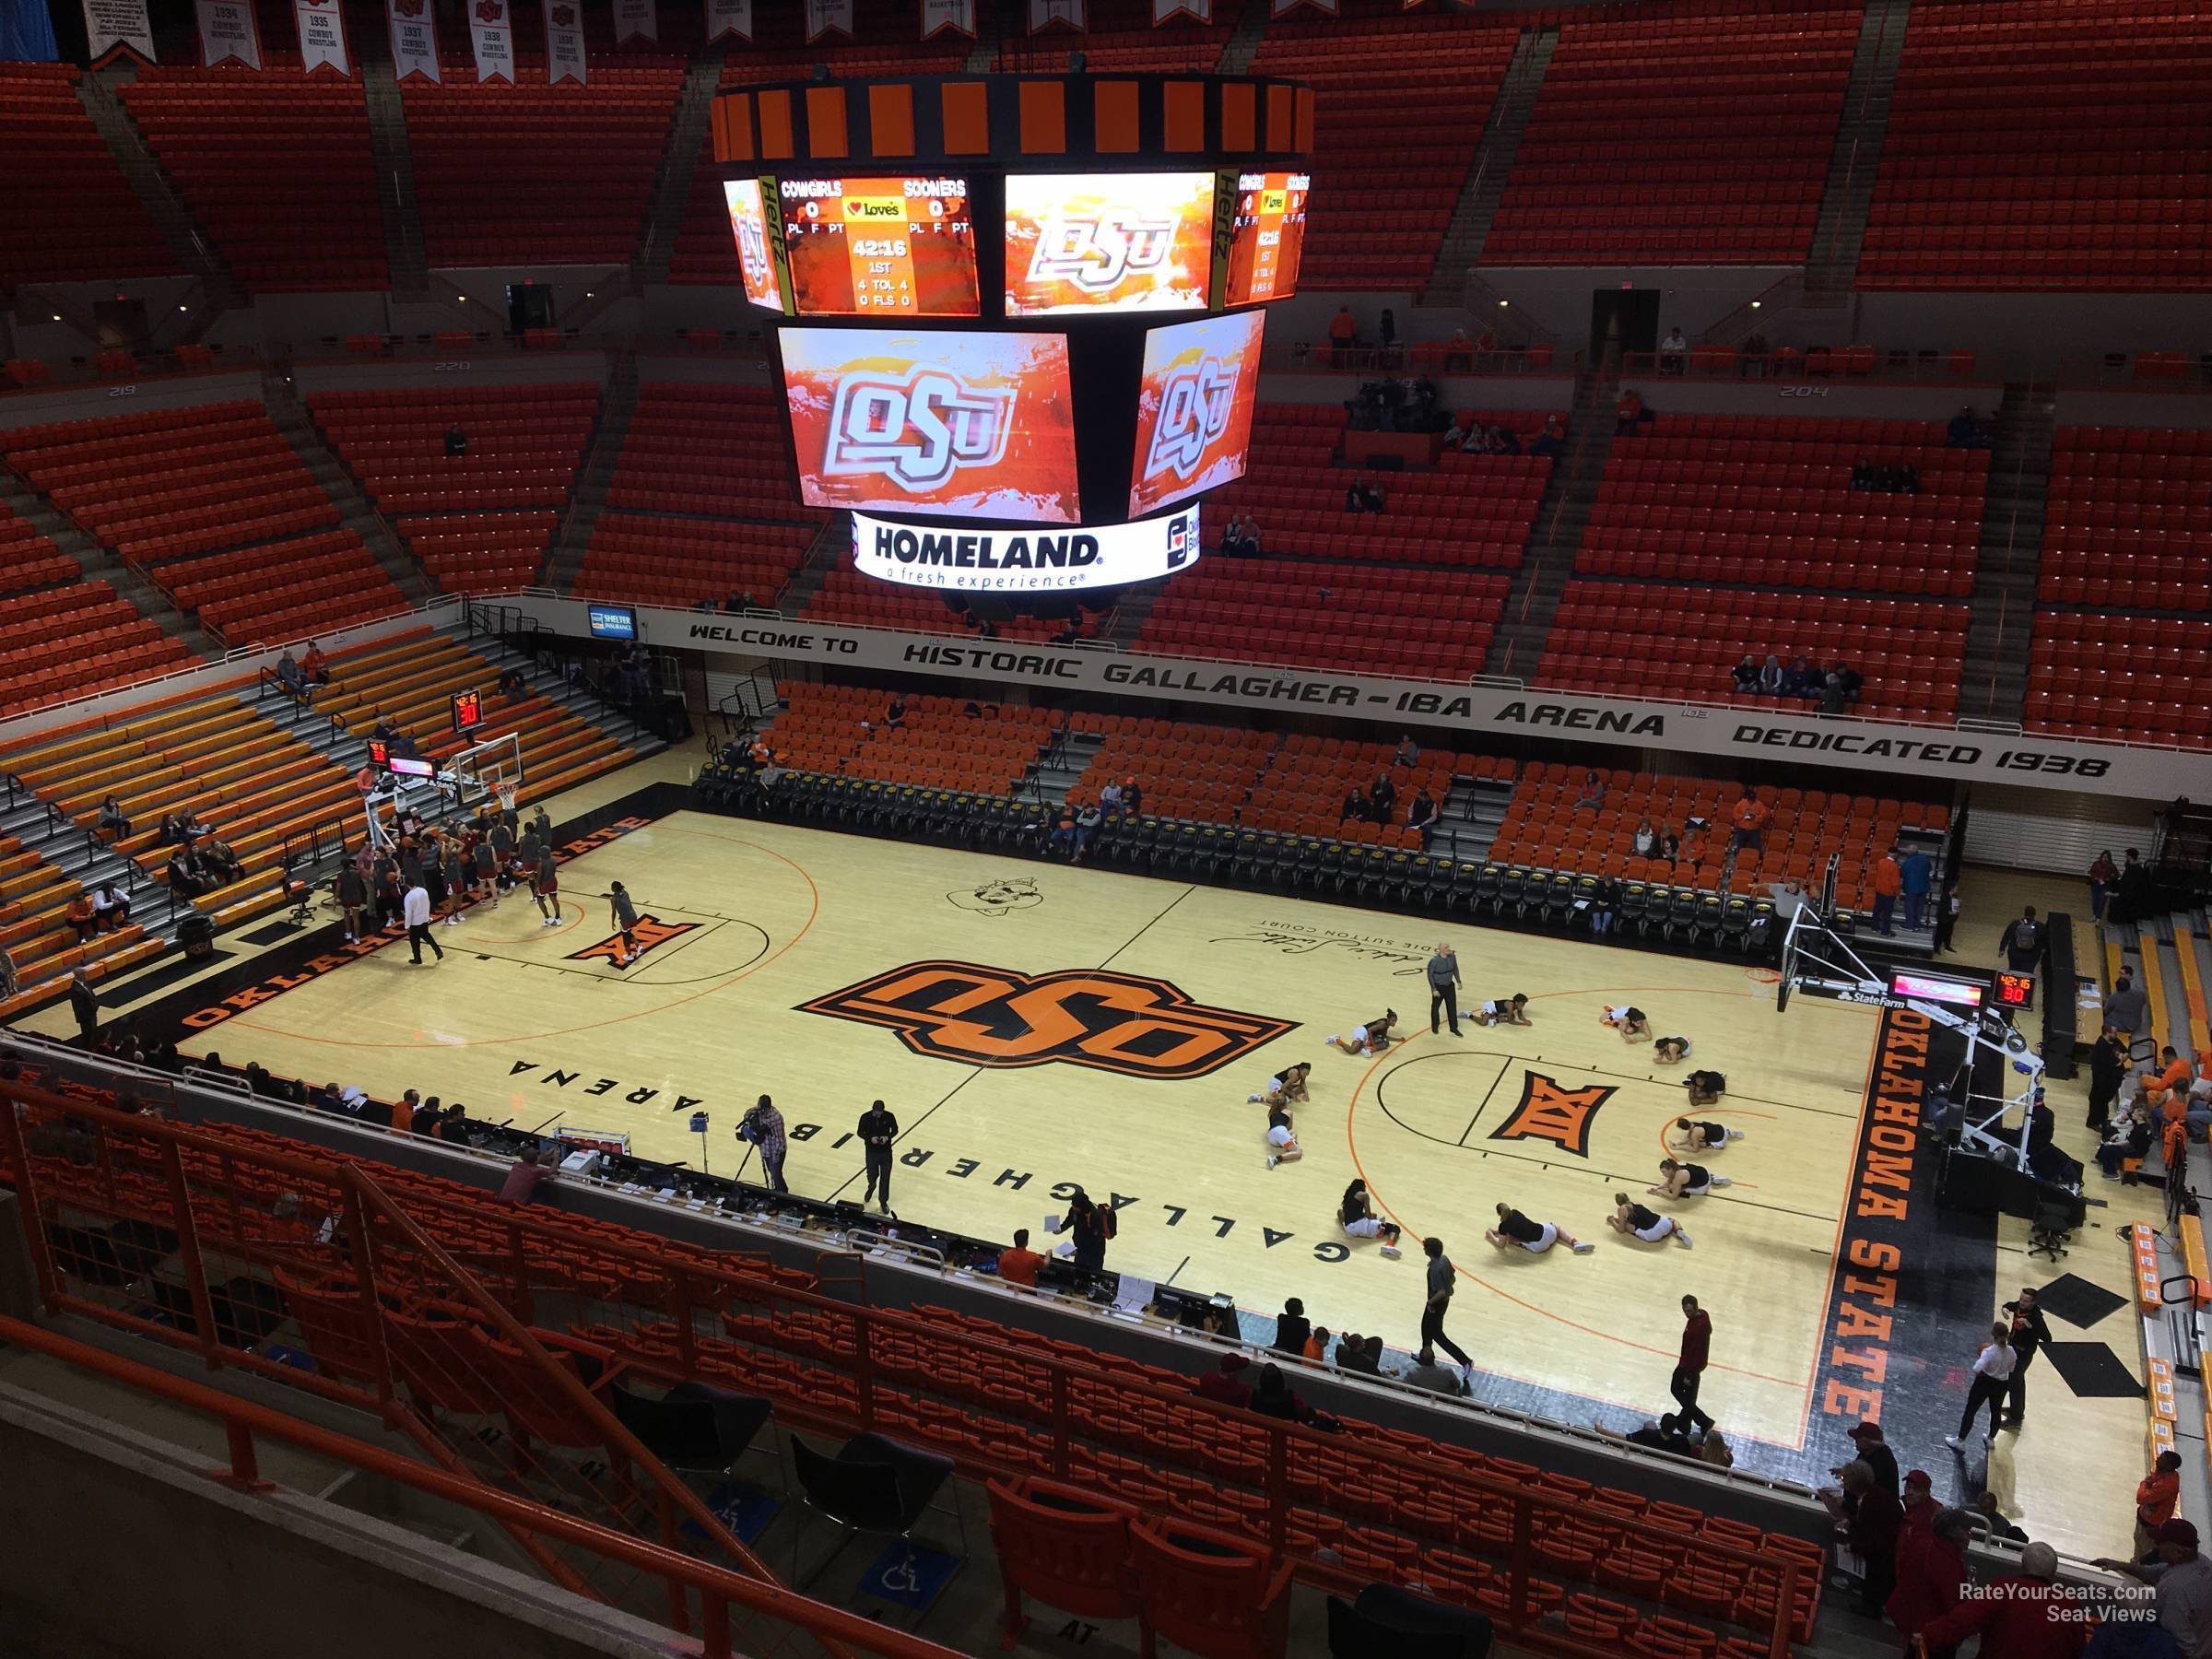 section 316, row 5 seat view  - gallagher-iba arena